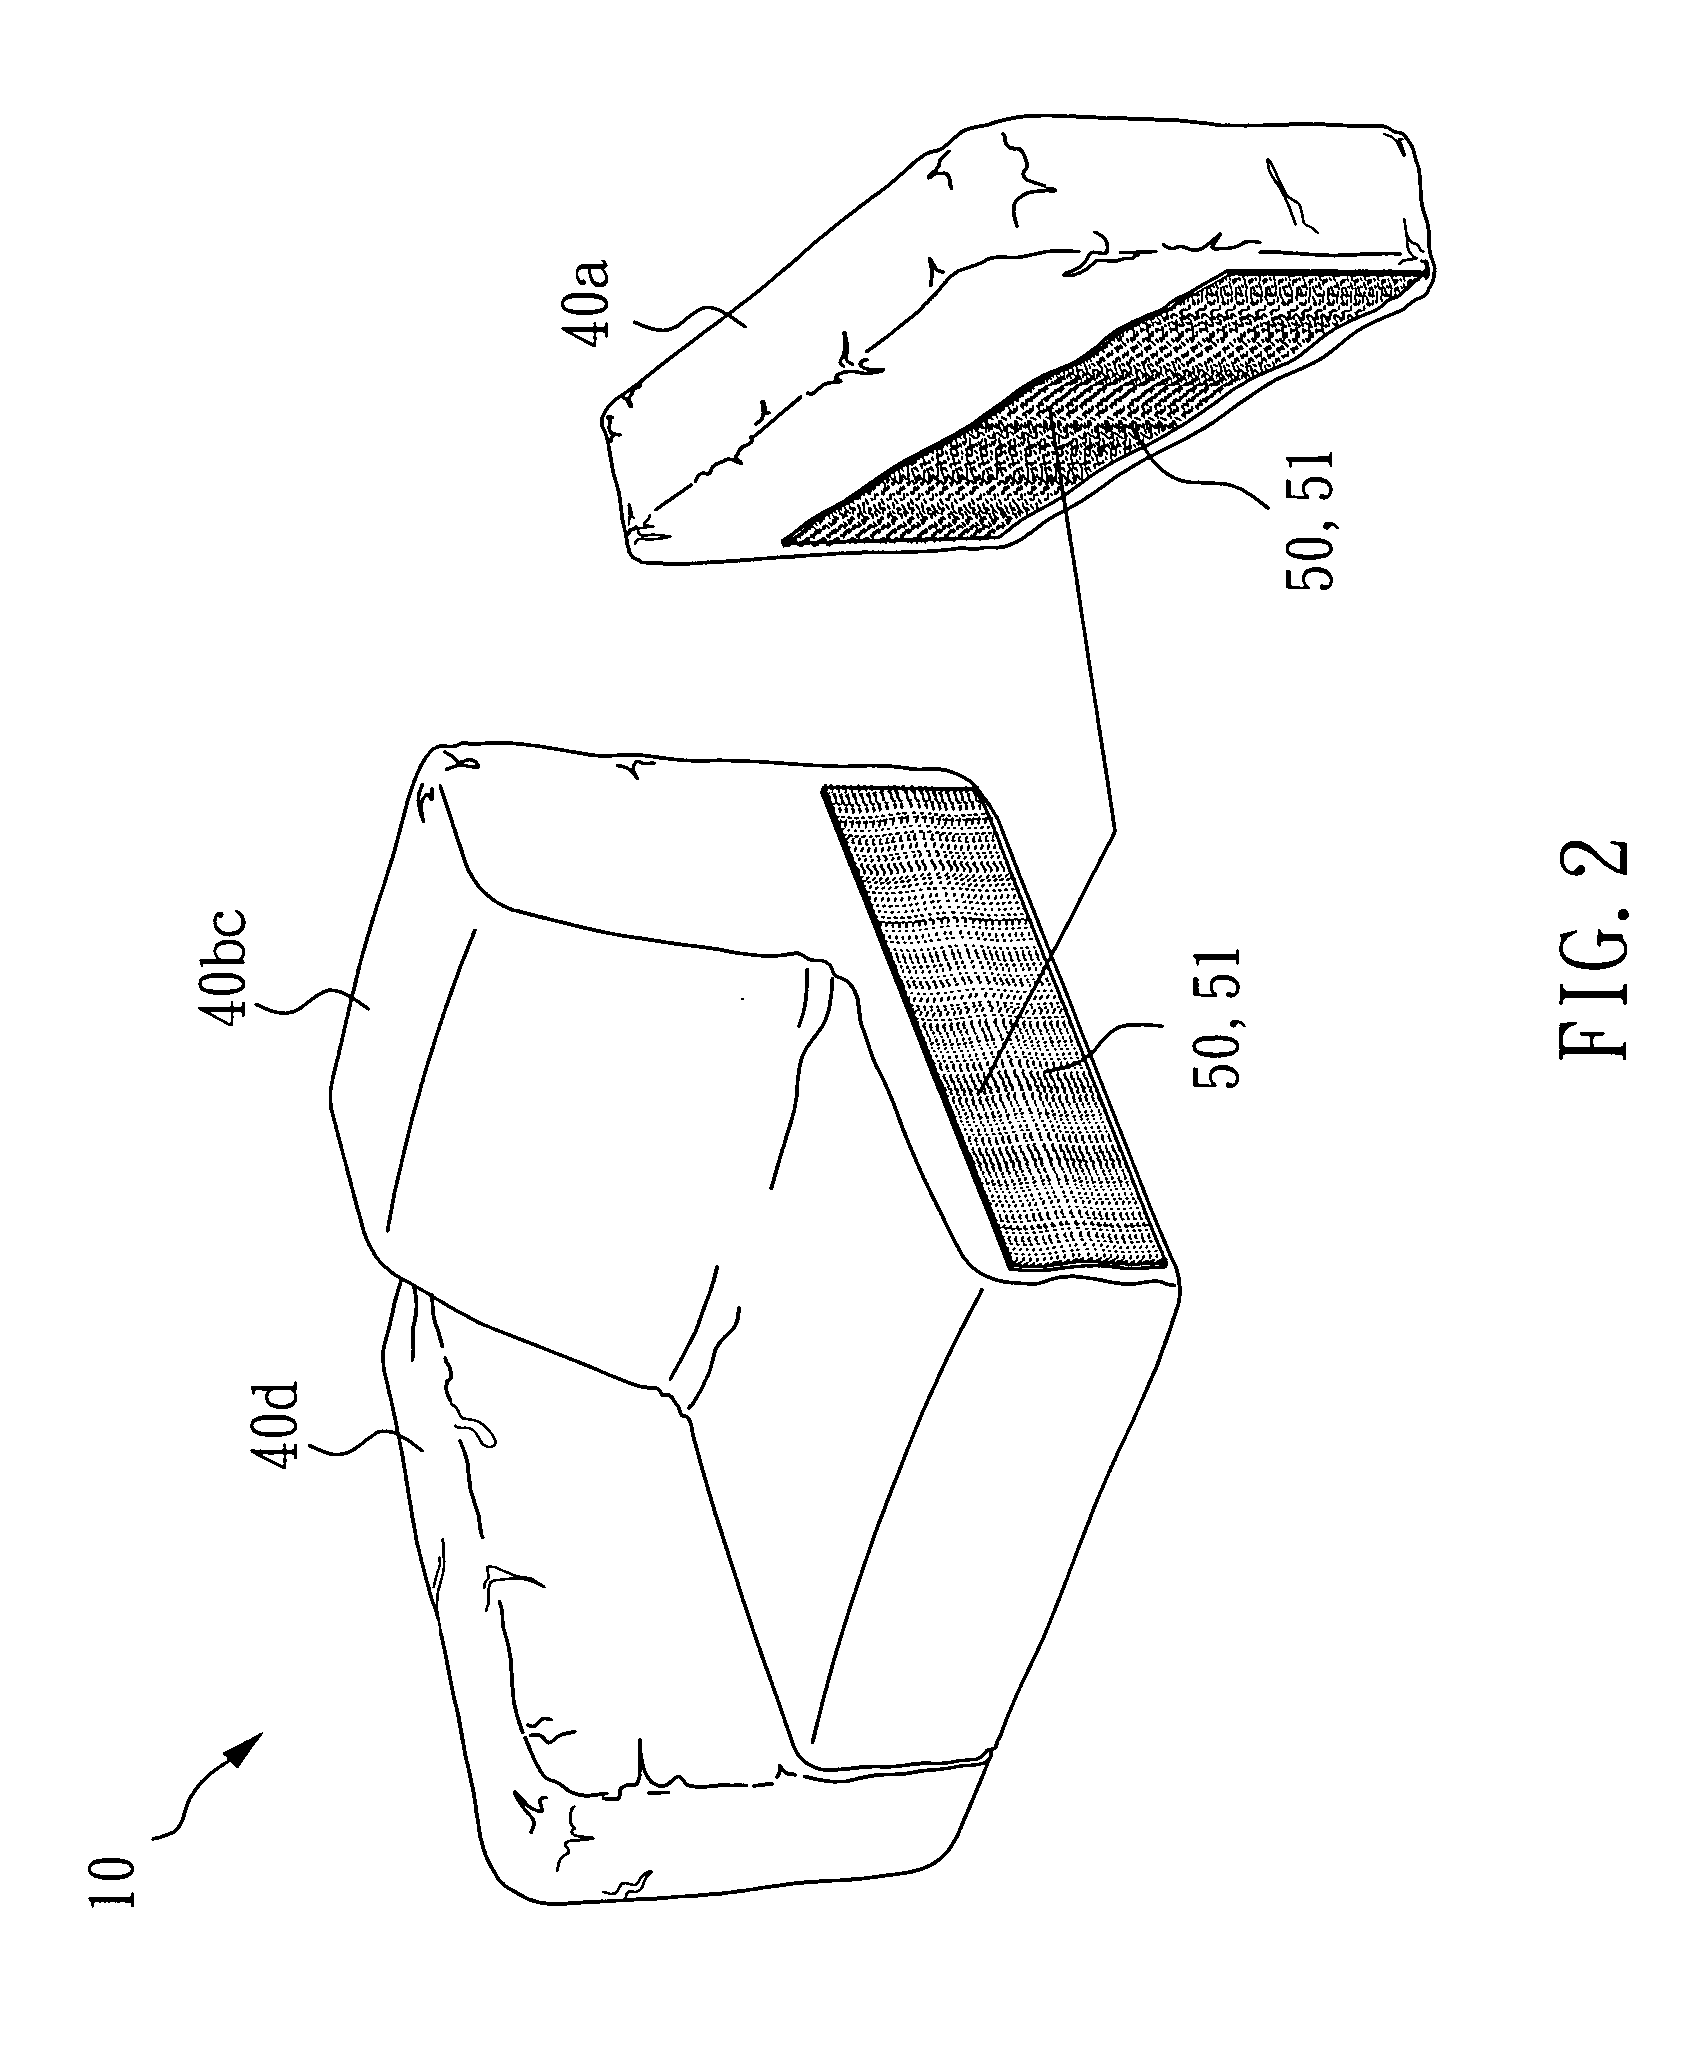 Inflatable furniture assembly